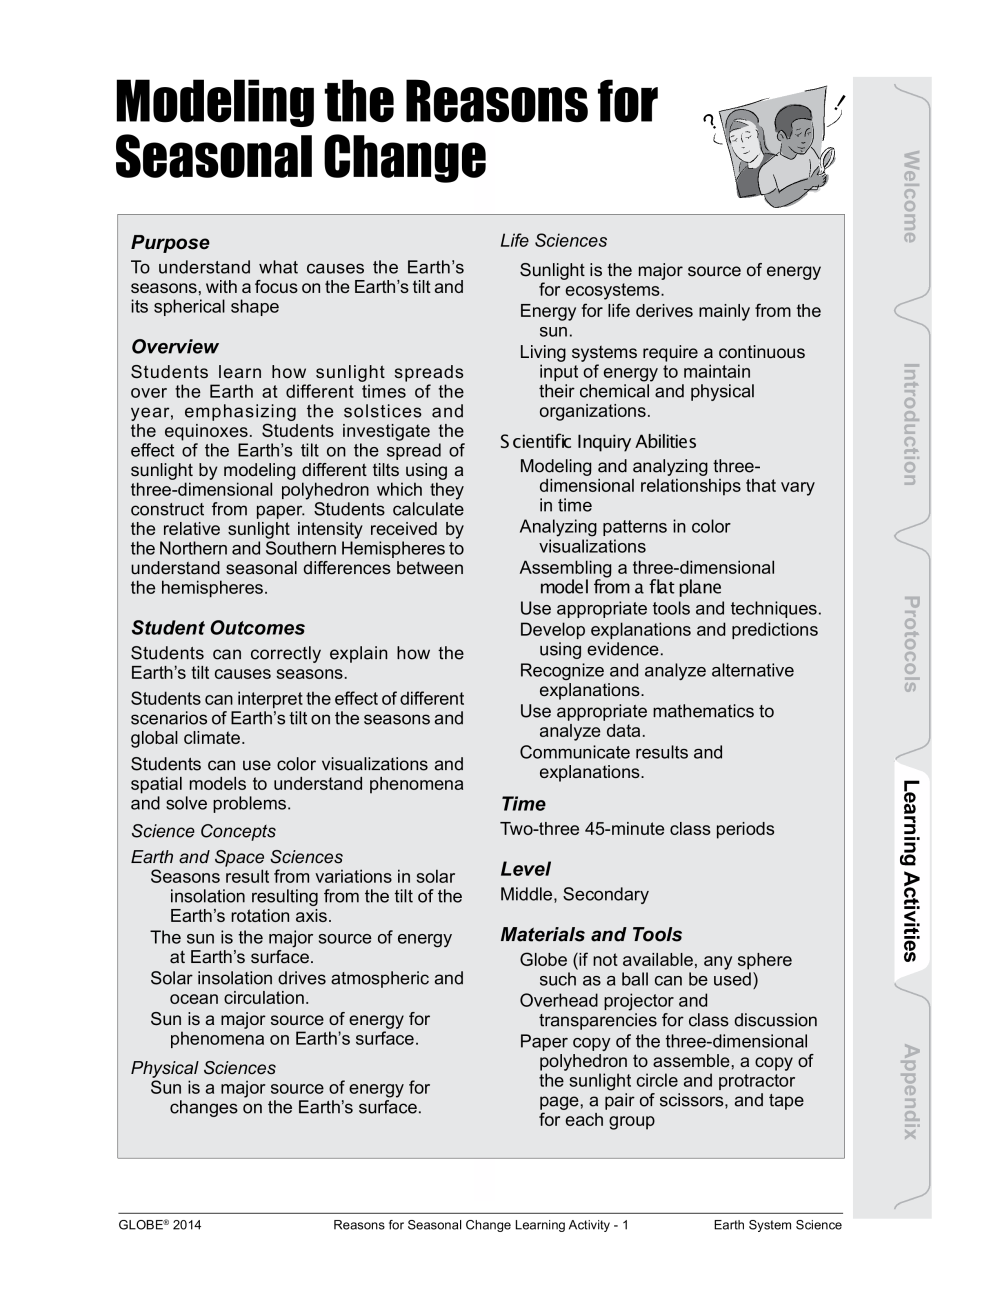 Learning Activities preview for S4- Modeling the Reasons for Seasonal Change